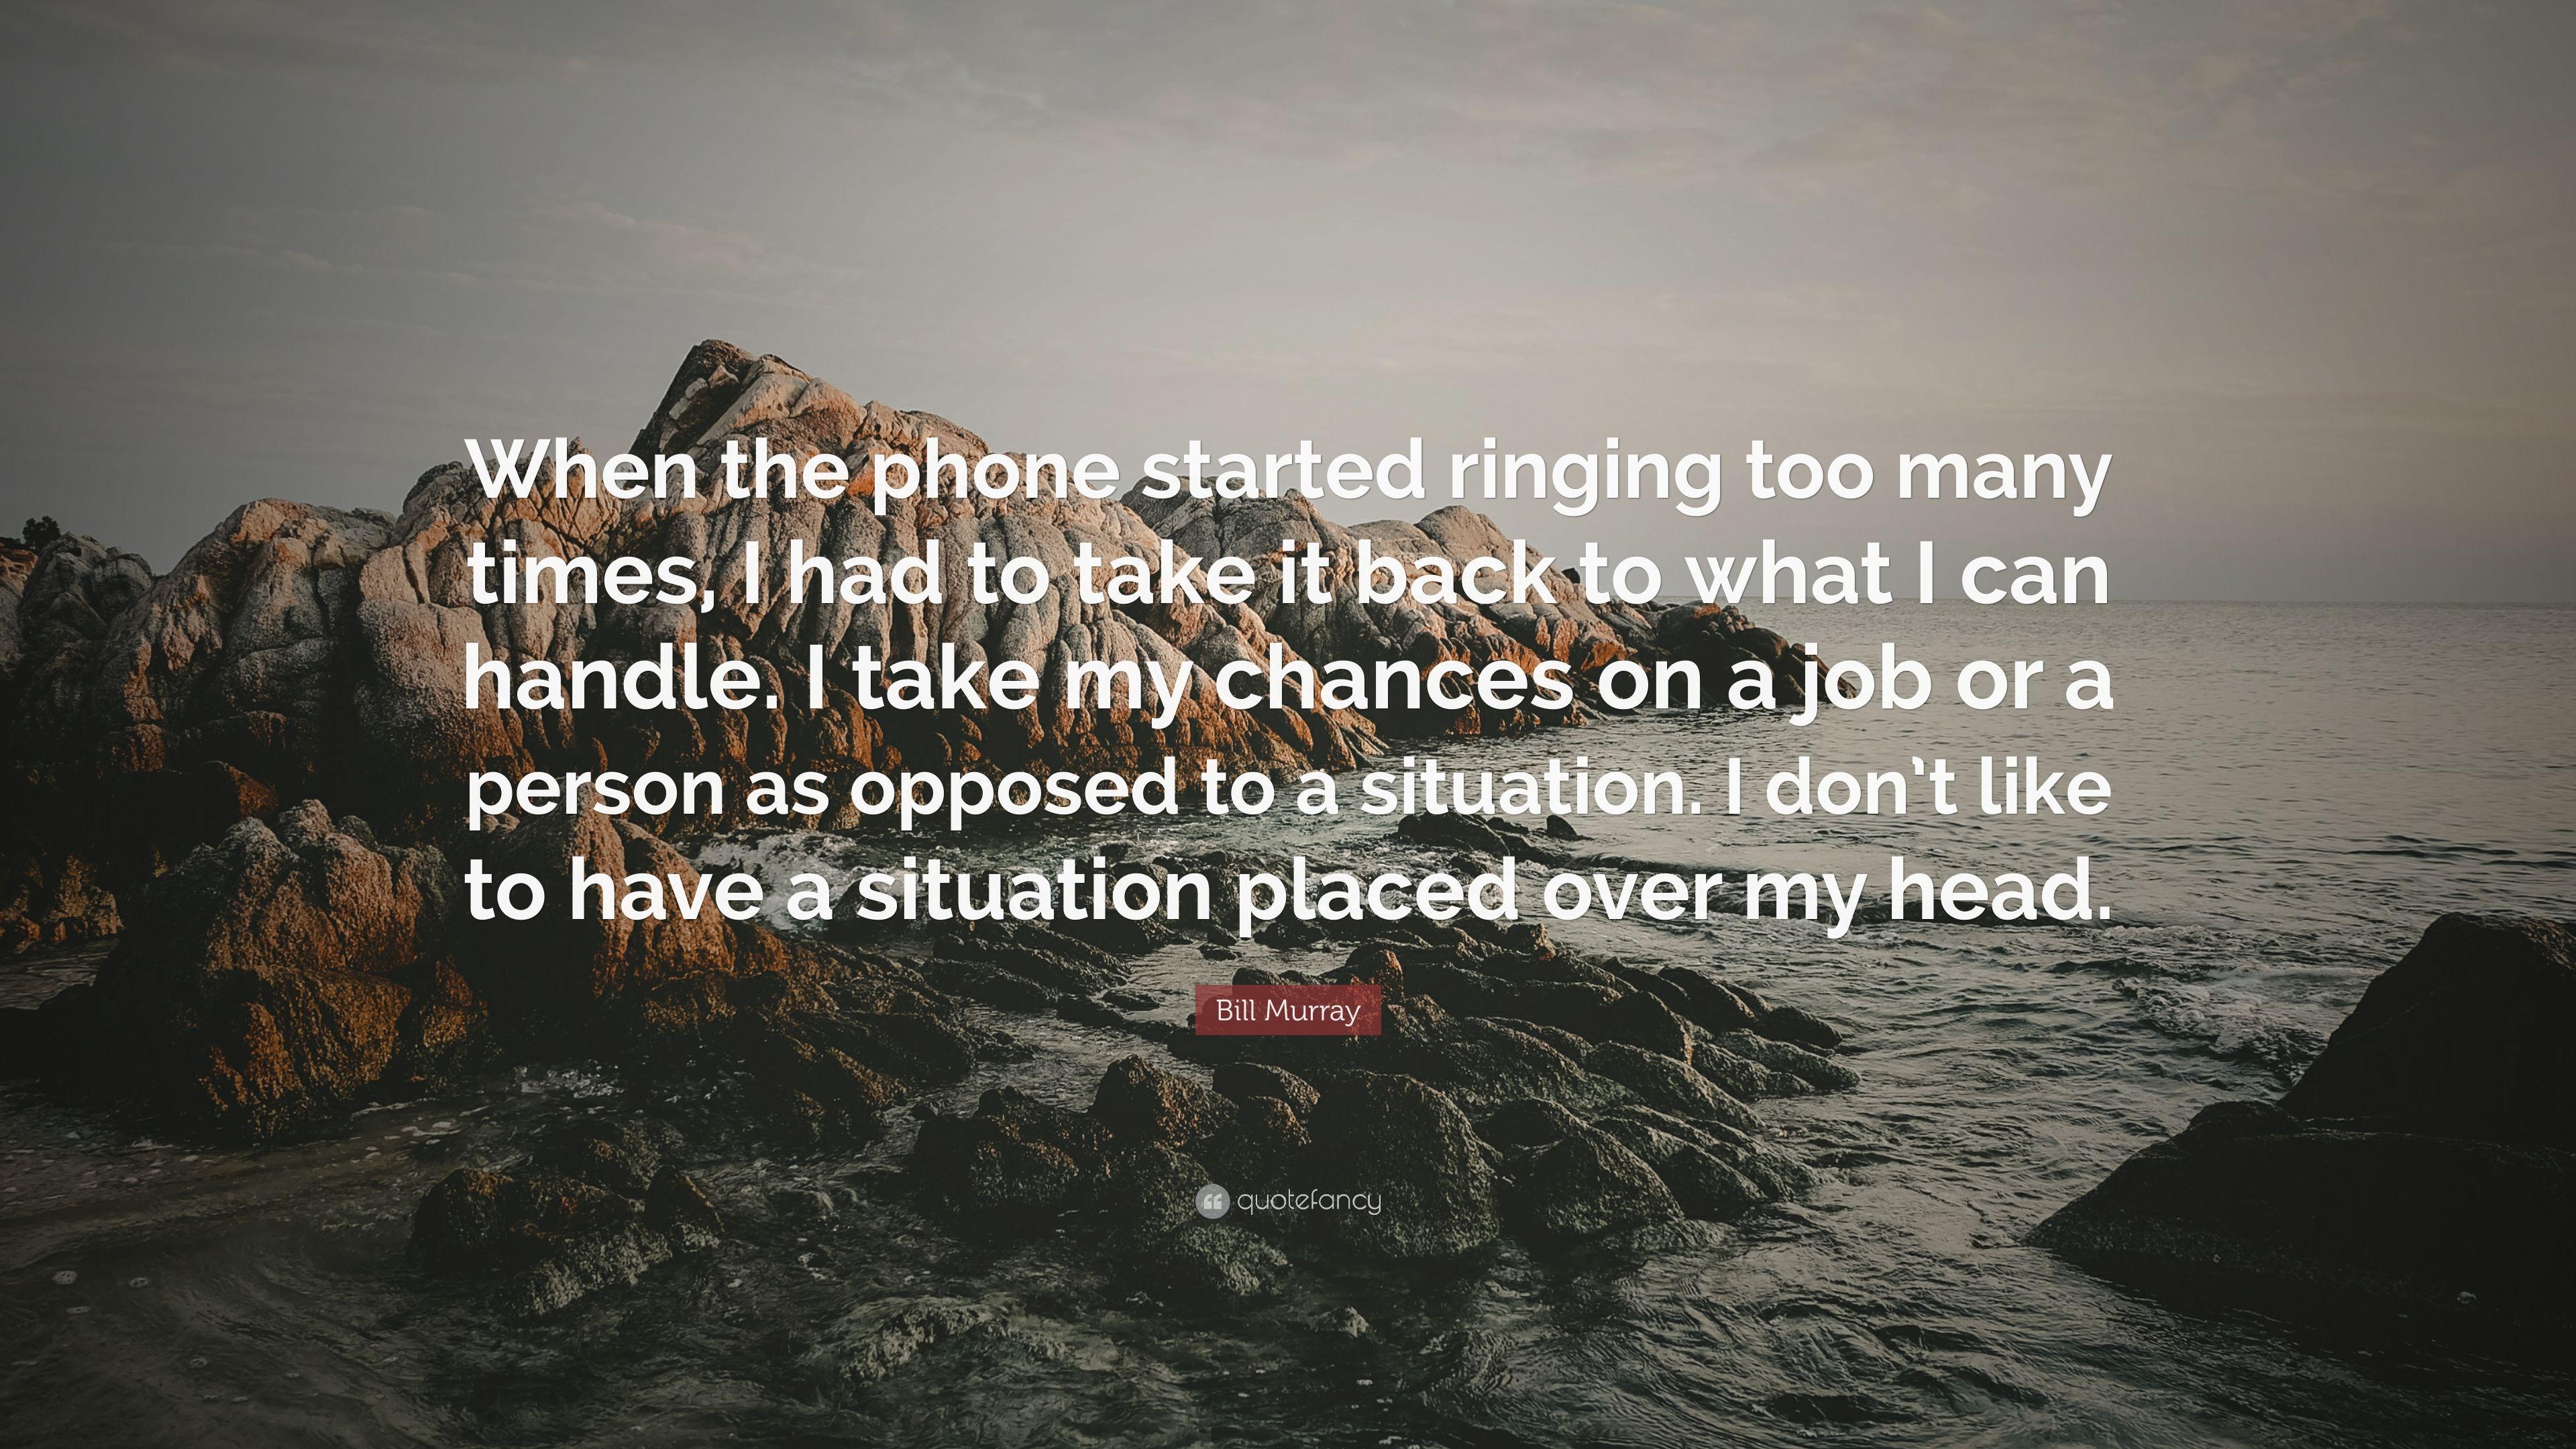 Bill Murray Quote: “When the phone started ringing too many times